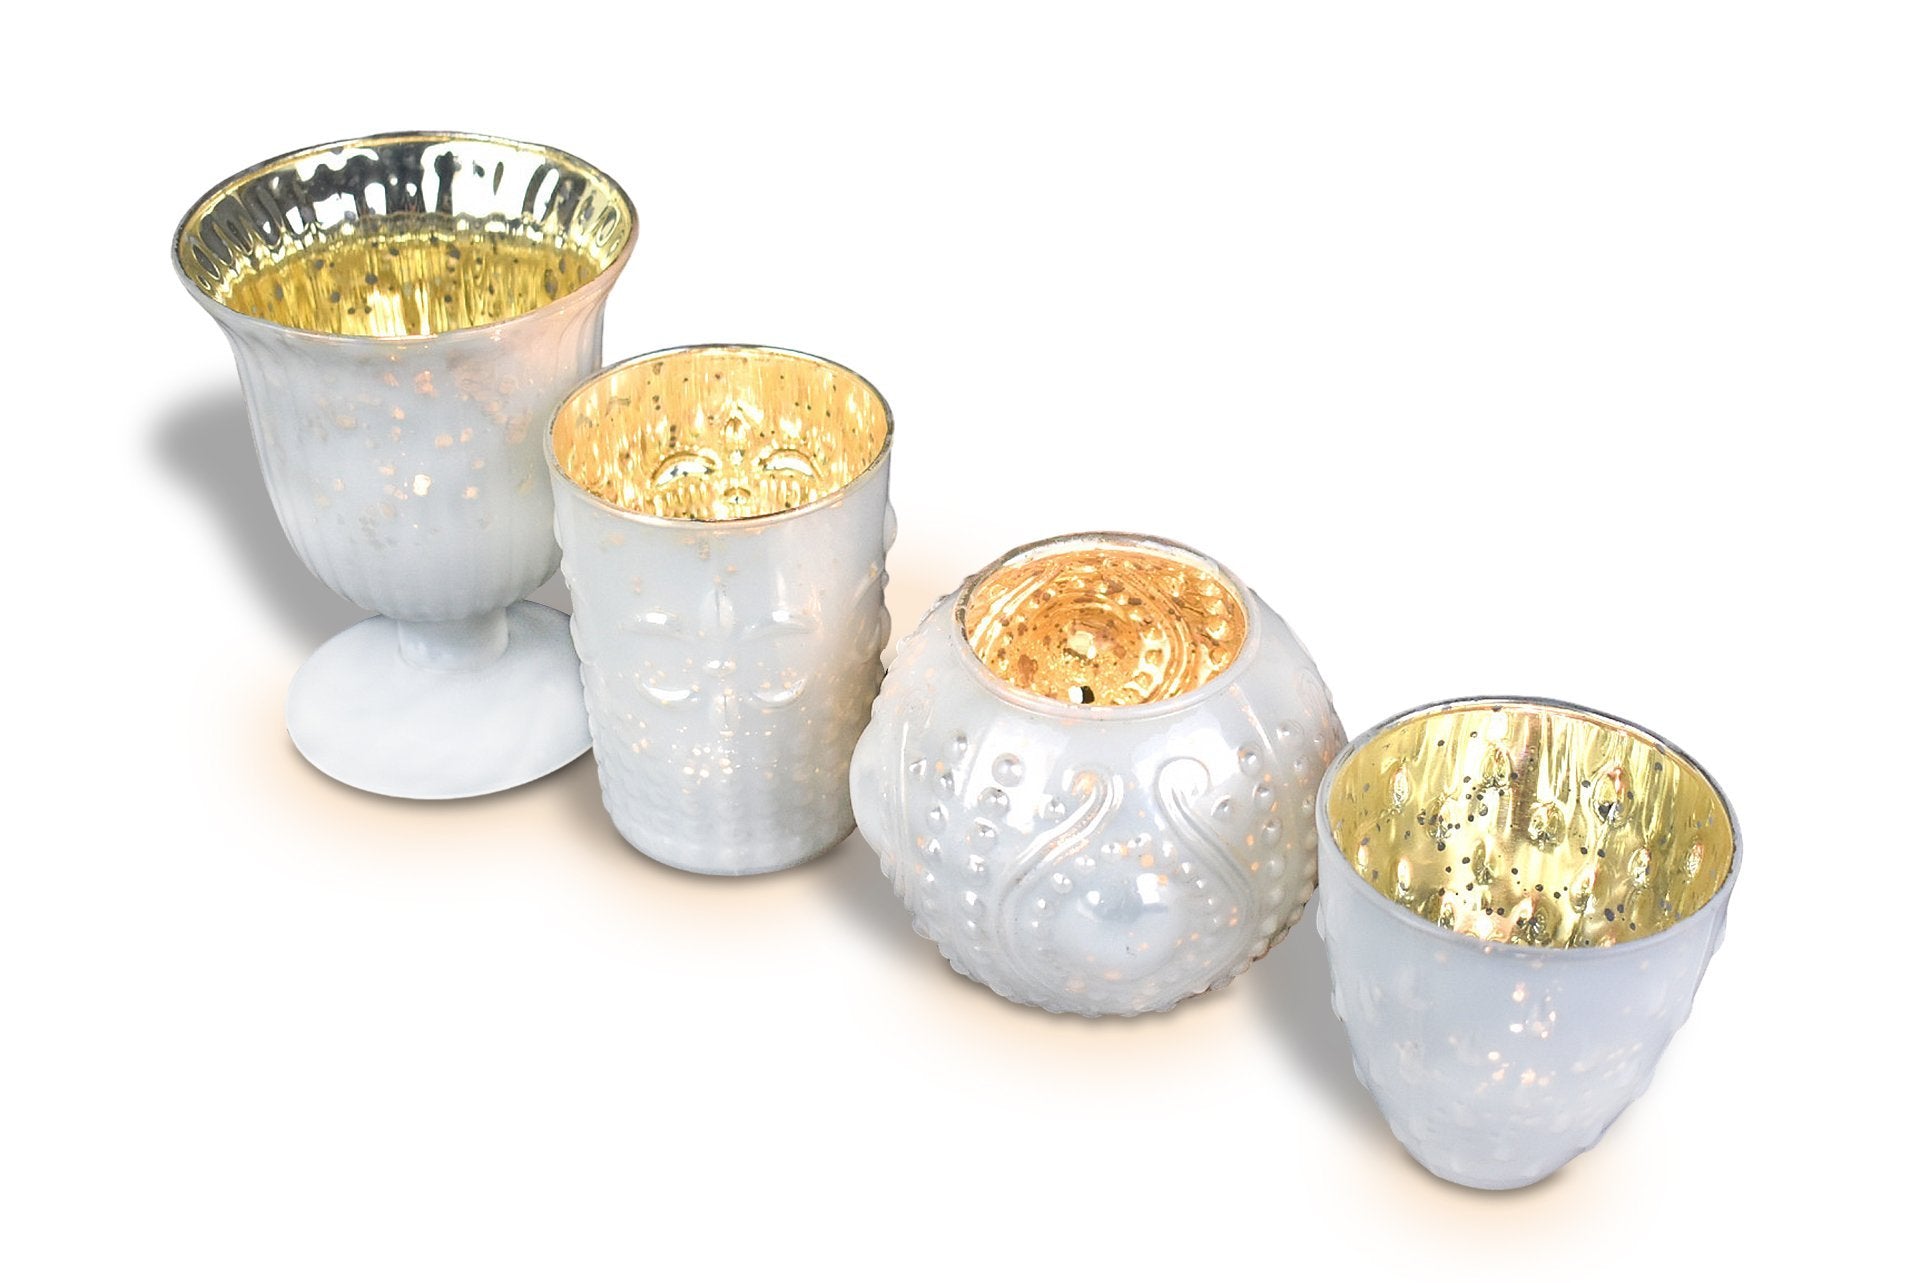 Vintage Glam Mercury Glass Tealight Votive Candle Holders (Pearl White, Set of 4, Assorted Designs and Sizes) - for Weddings, Events and Home Décor - PaperLanternStore.com - Paper Lanterns, Decor, Party Lights & More